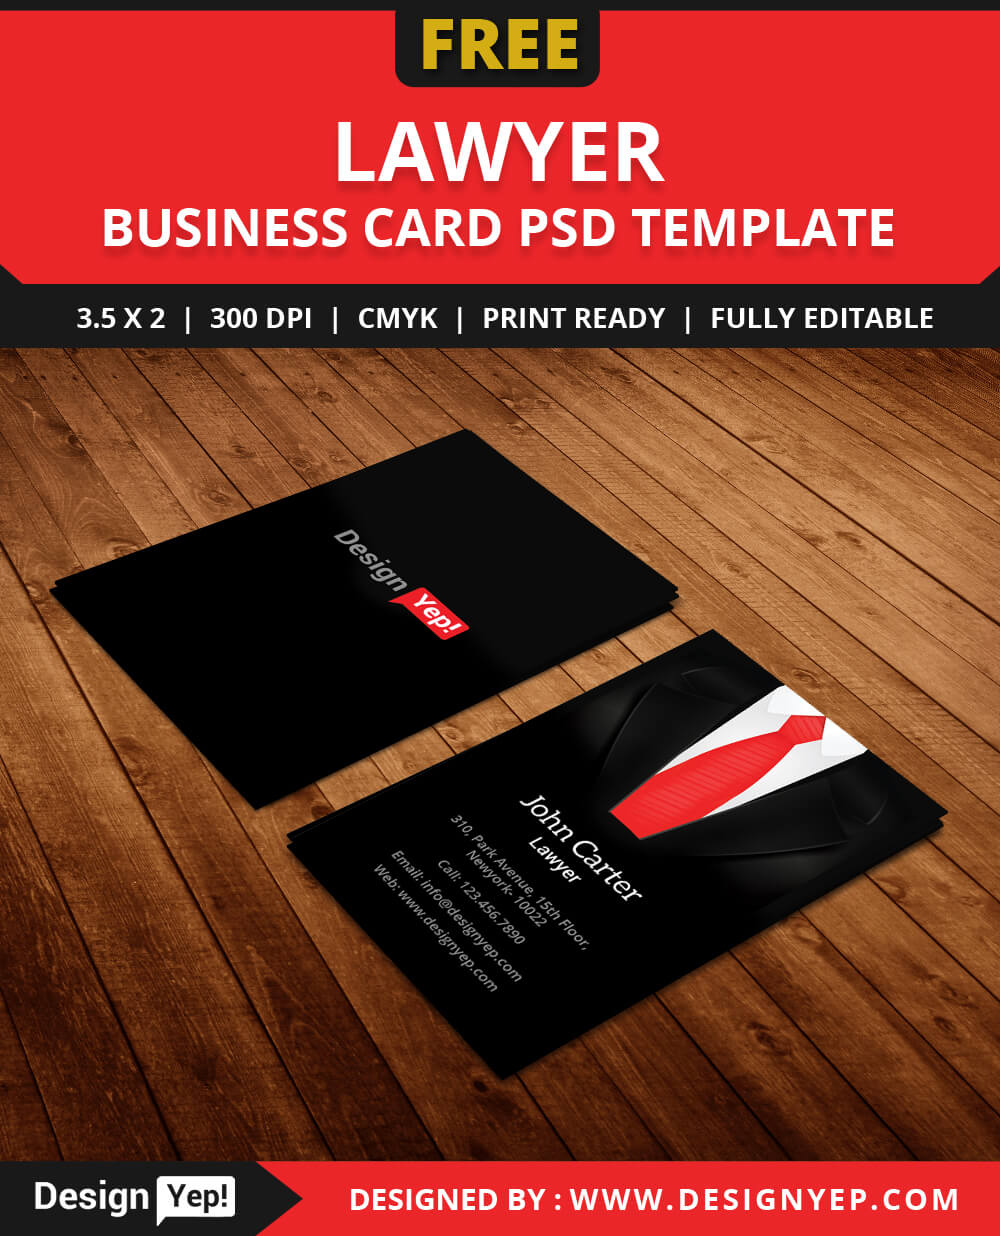 Free Lawyer Business Card Template Psd – Designyep Within Call Card Templates